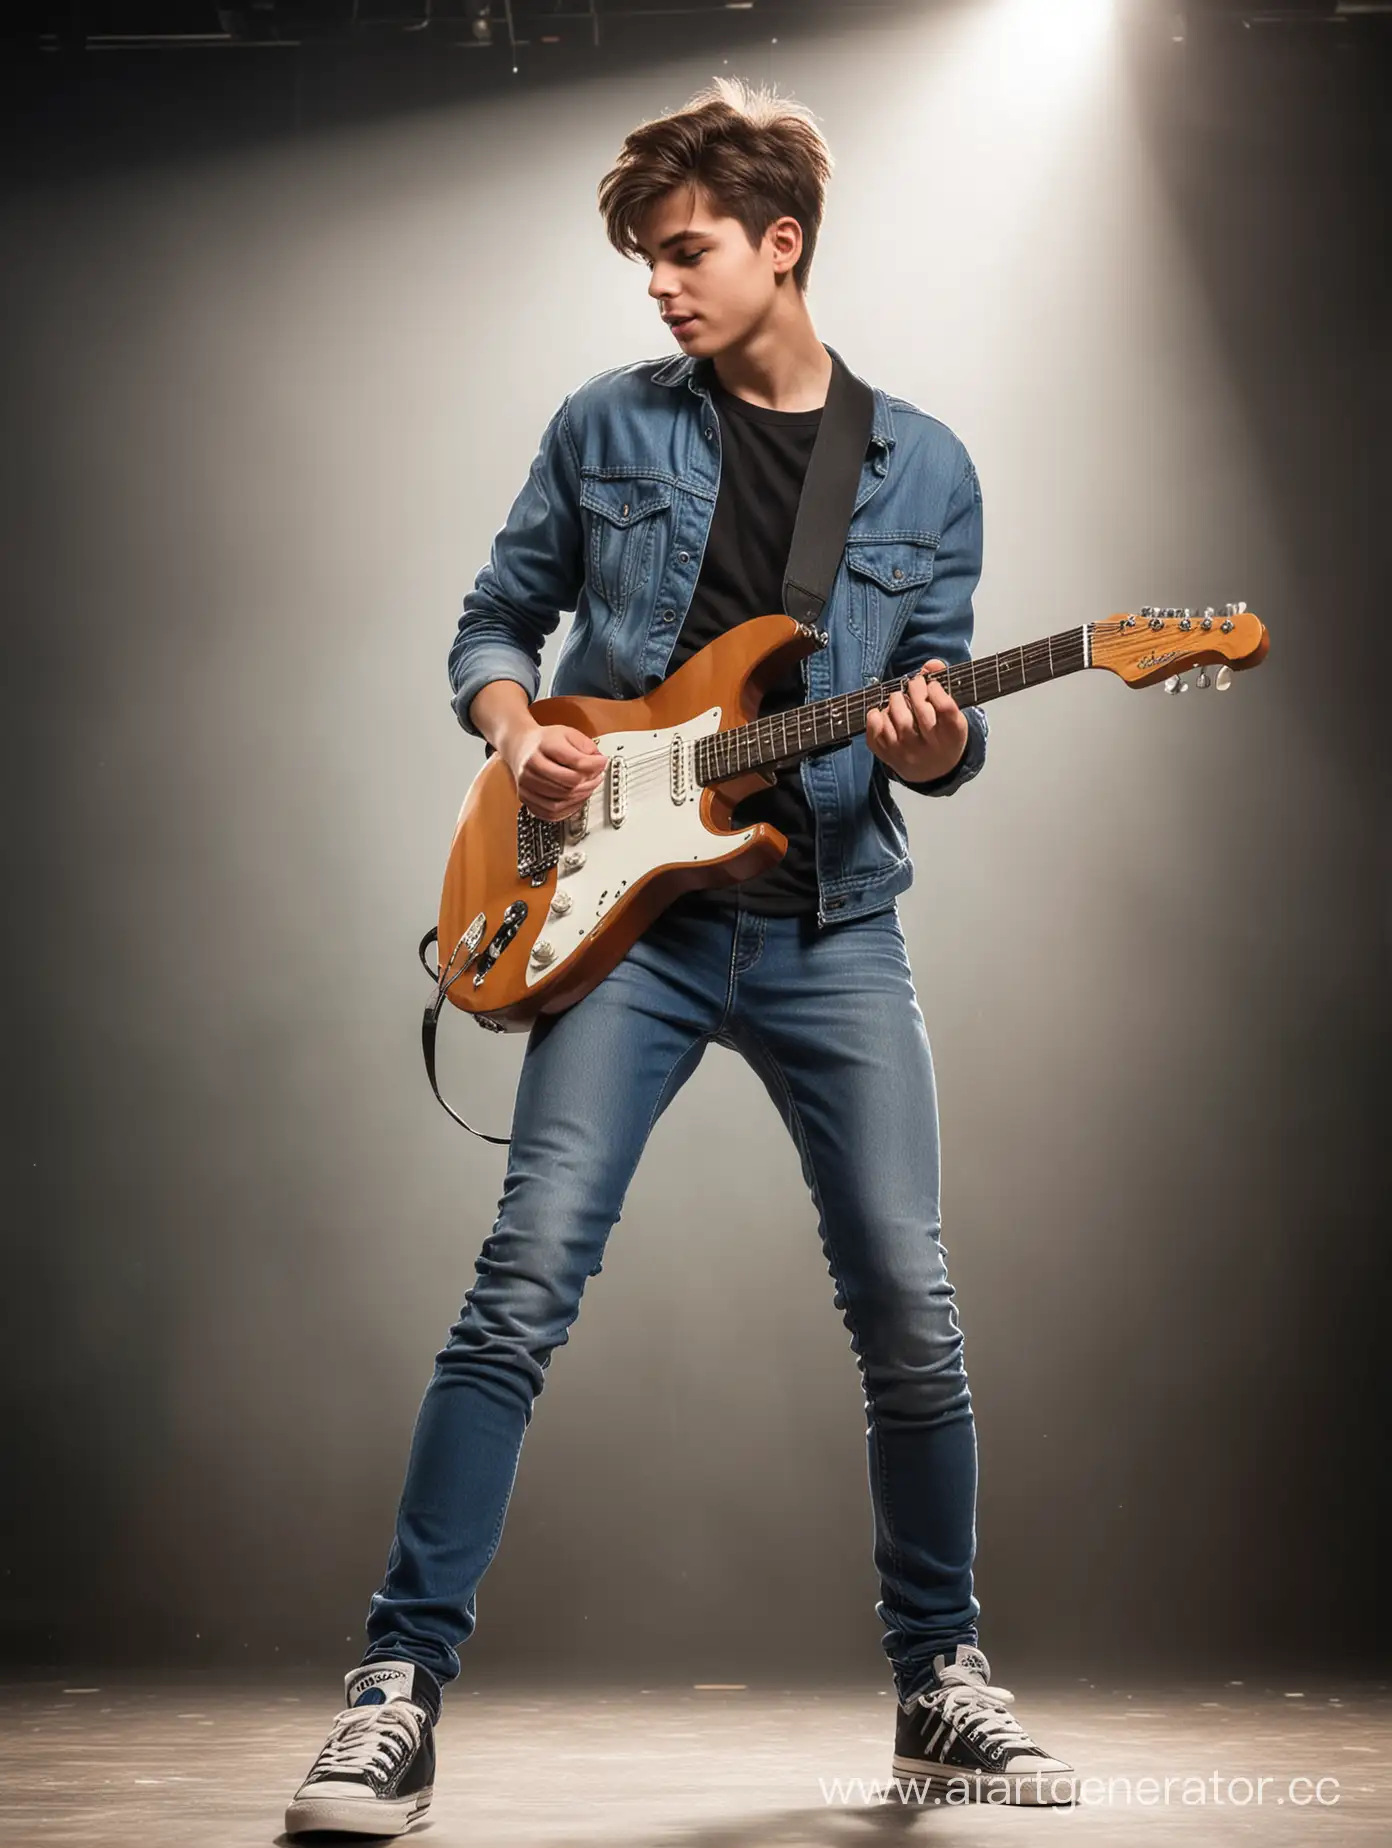 Teenager-Performing-Live-Guitarist-in-Casual-Attire